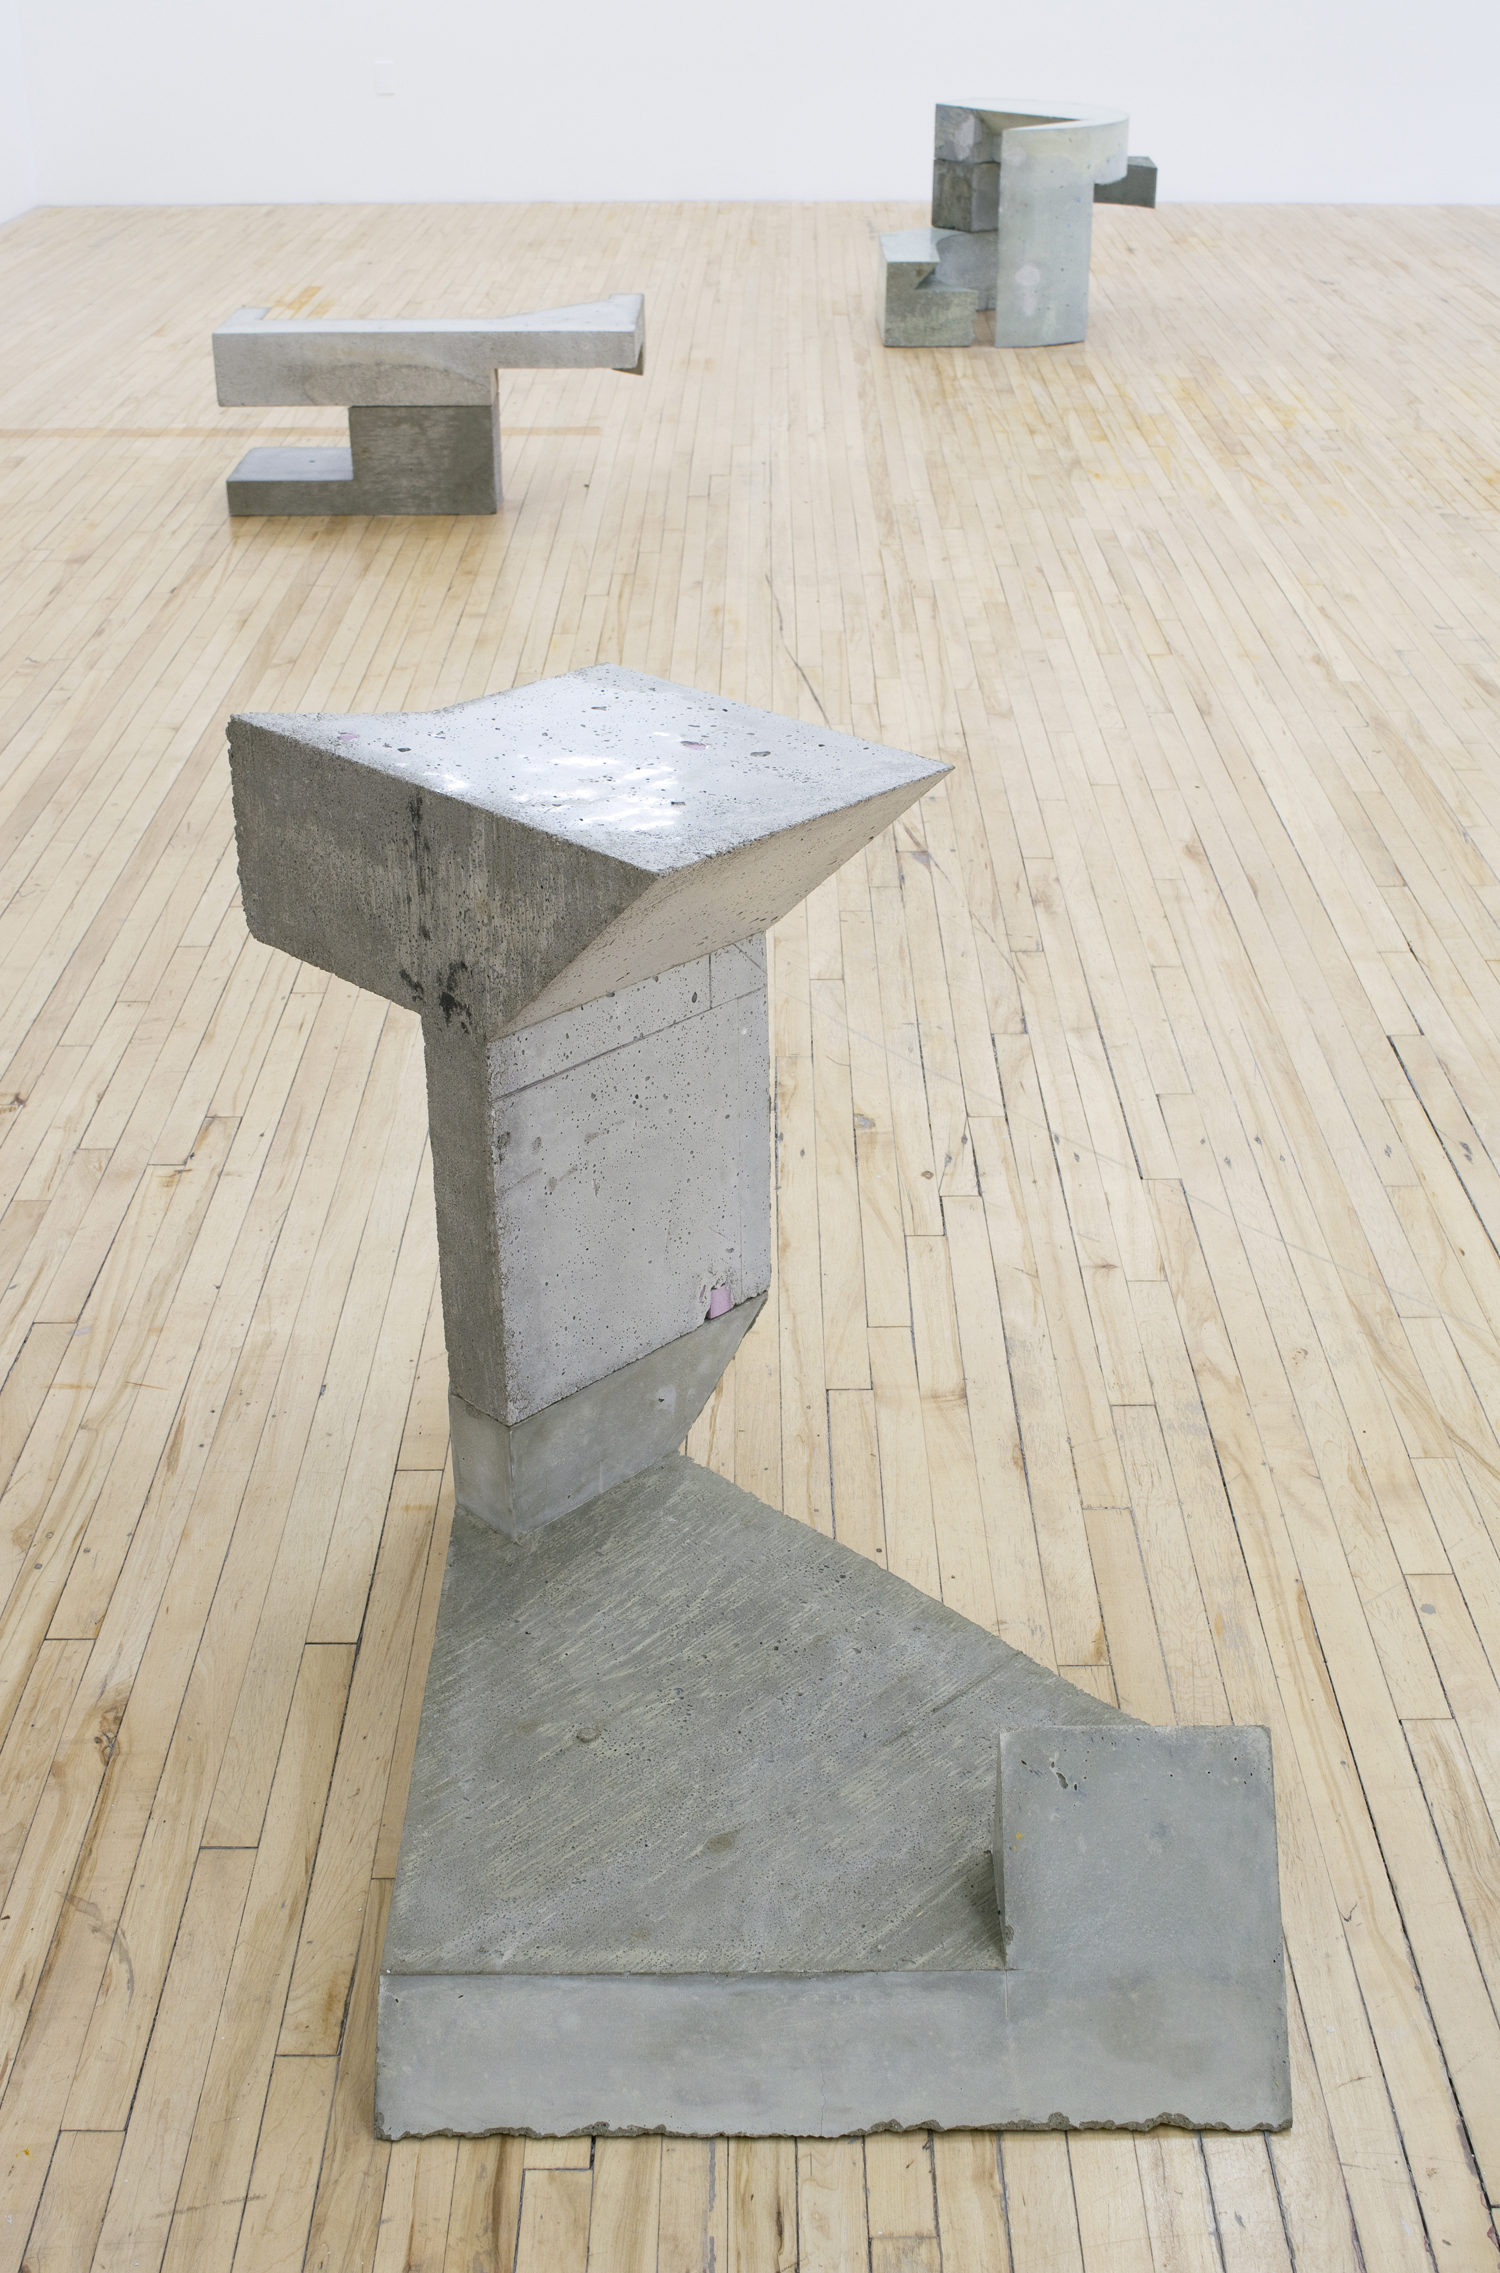  Front:  Pthona , 2016, concrete and foam, 29 x 36 x 30 in 